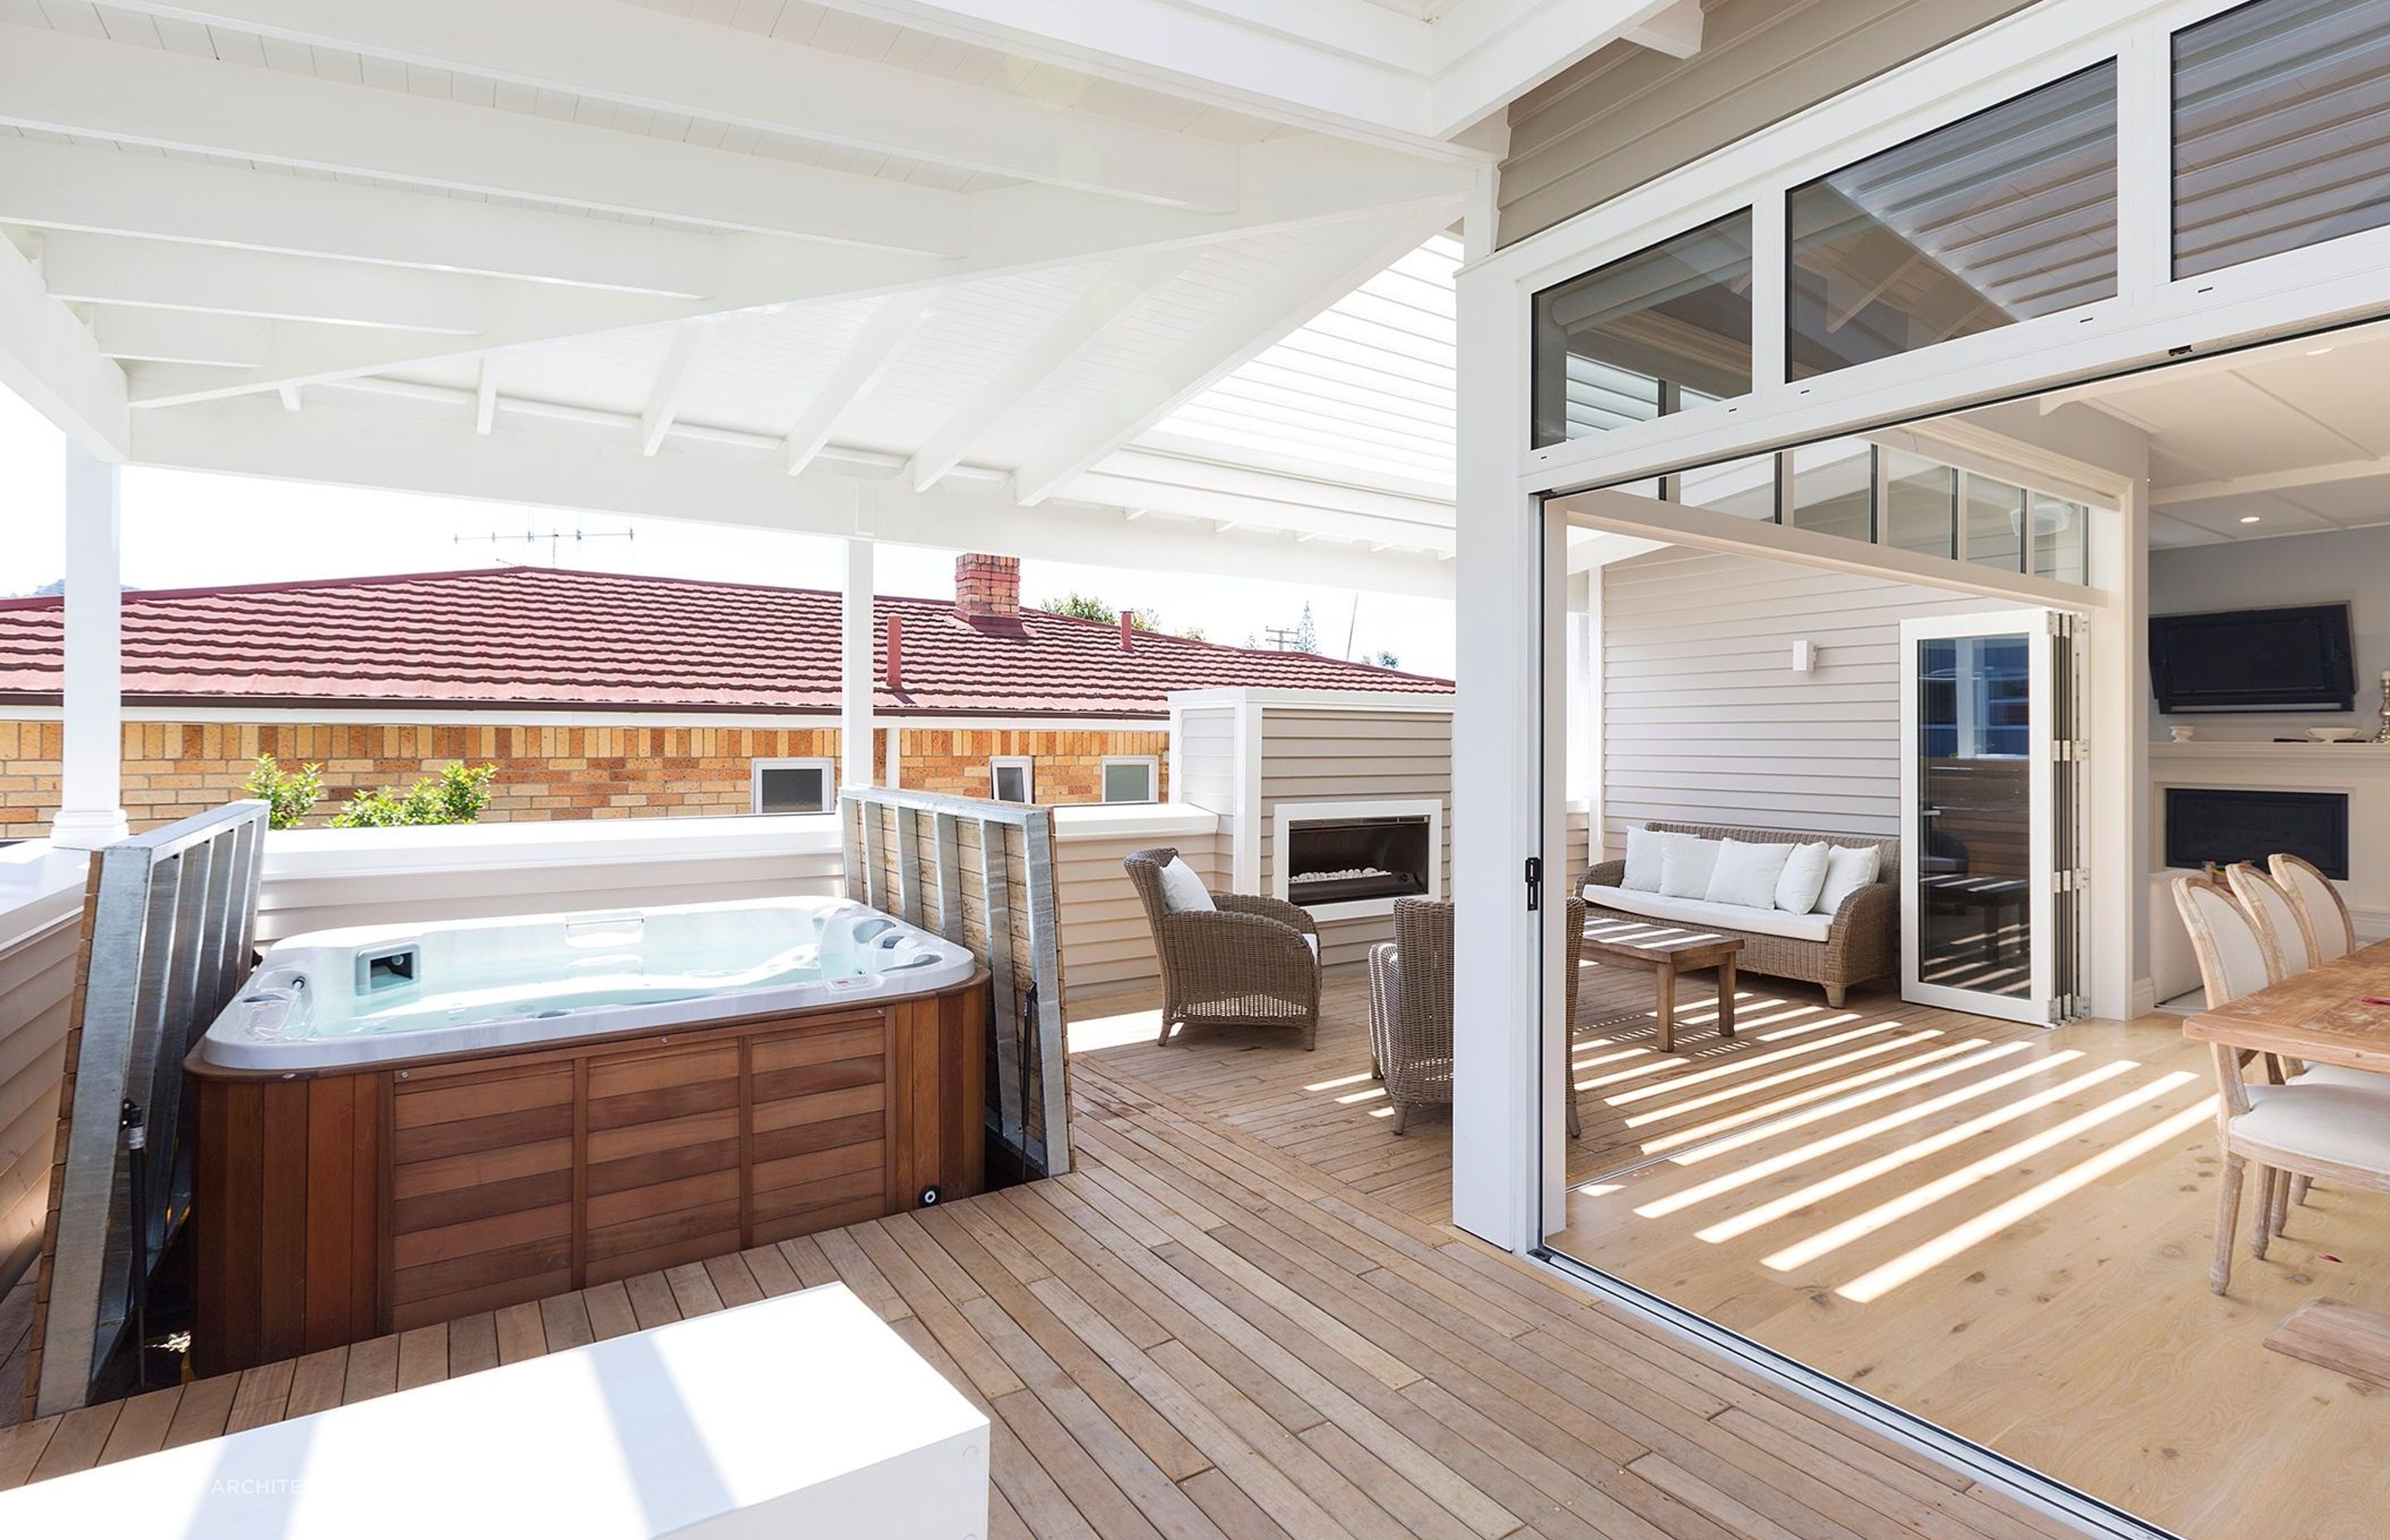 Innovation and ingenuity with this Omanu Beach home's concealed spa pool.